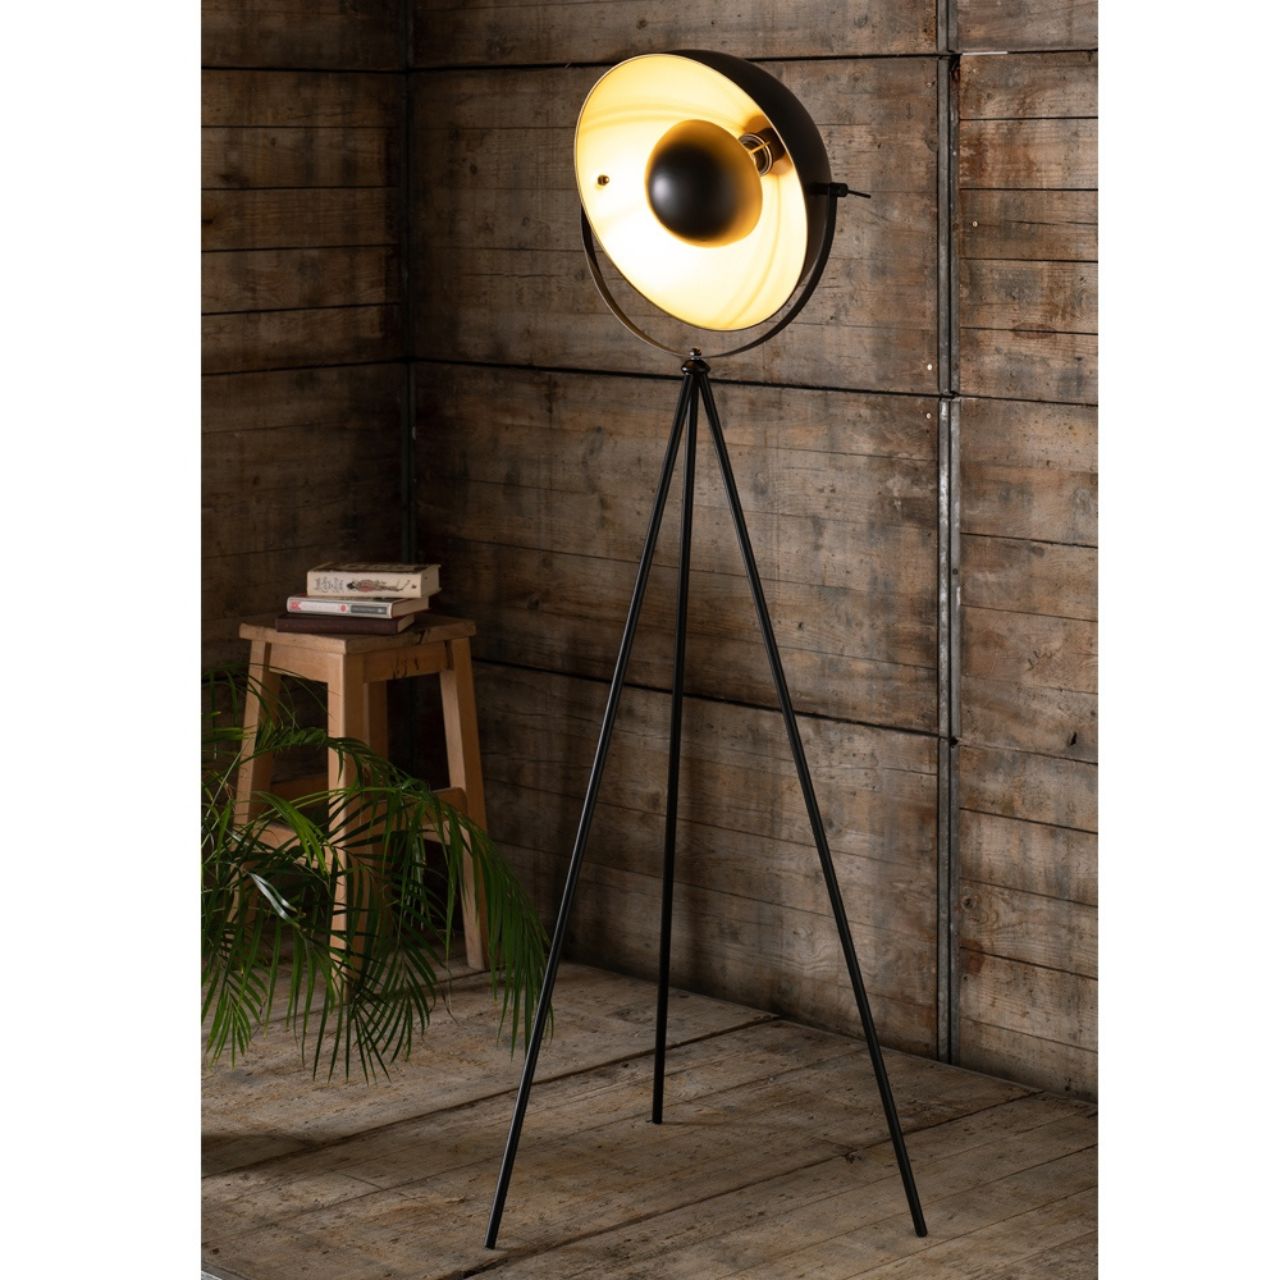 The Nyhavn Floor Lamp is a true statement piece inspired by retro studio lighting. The matt black finish is contrasted with warm gold tones. The black centre piece creates a soft diffused lighting effect, ideal for creating atmospheric mood lighting.